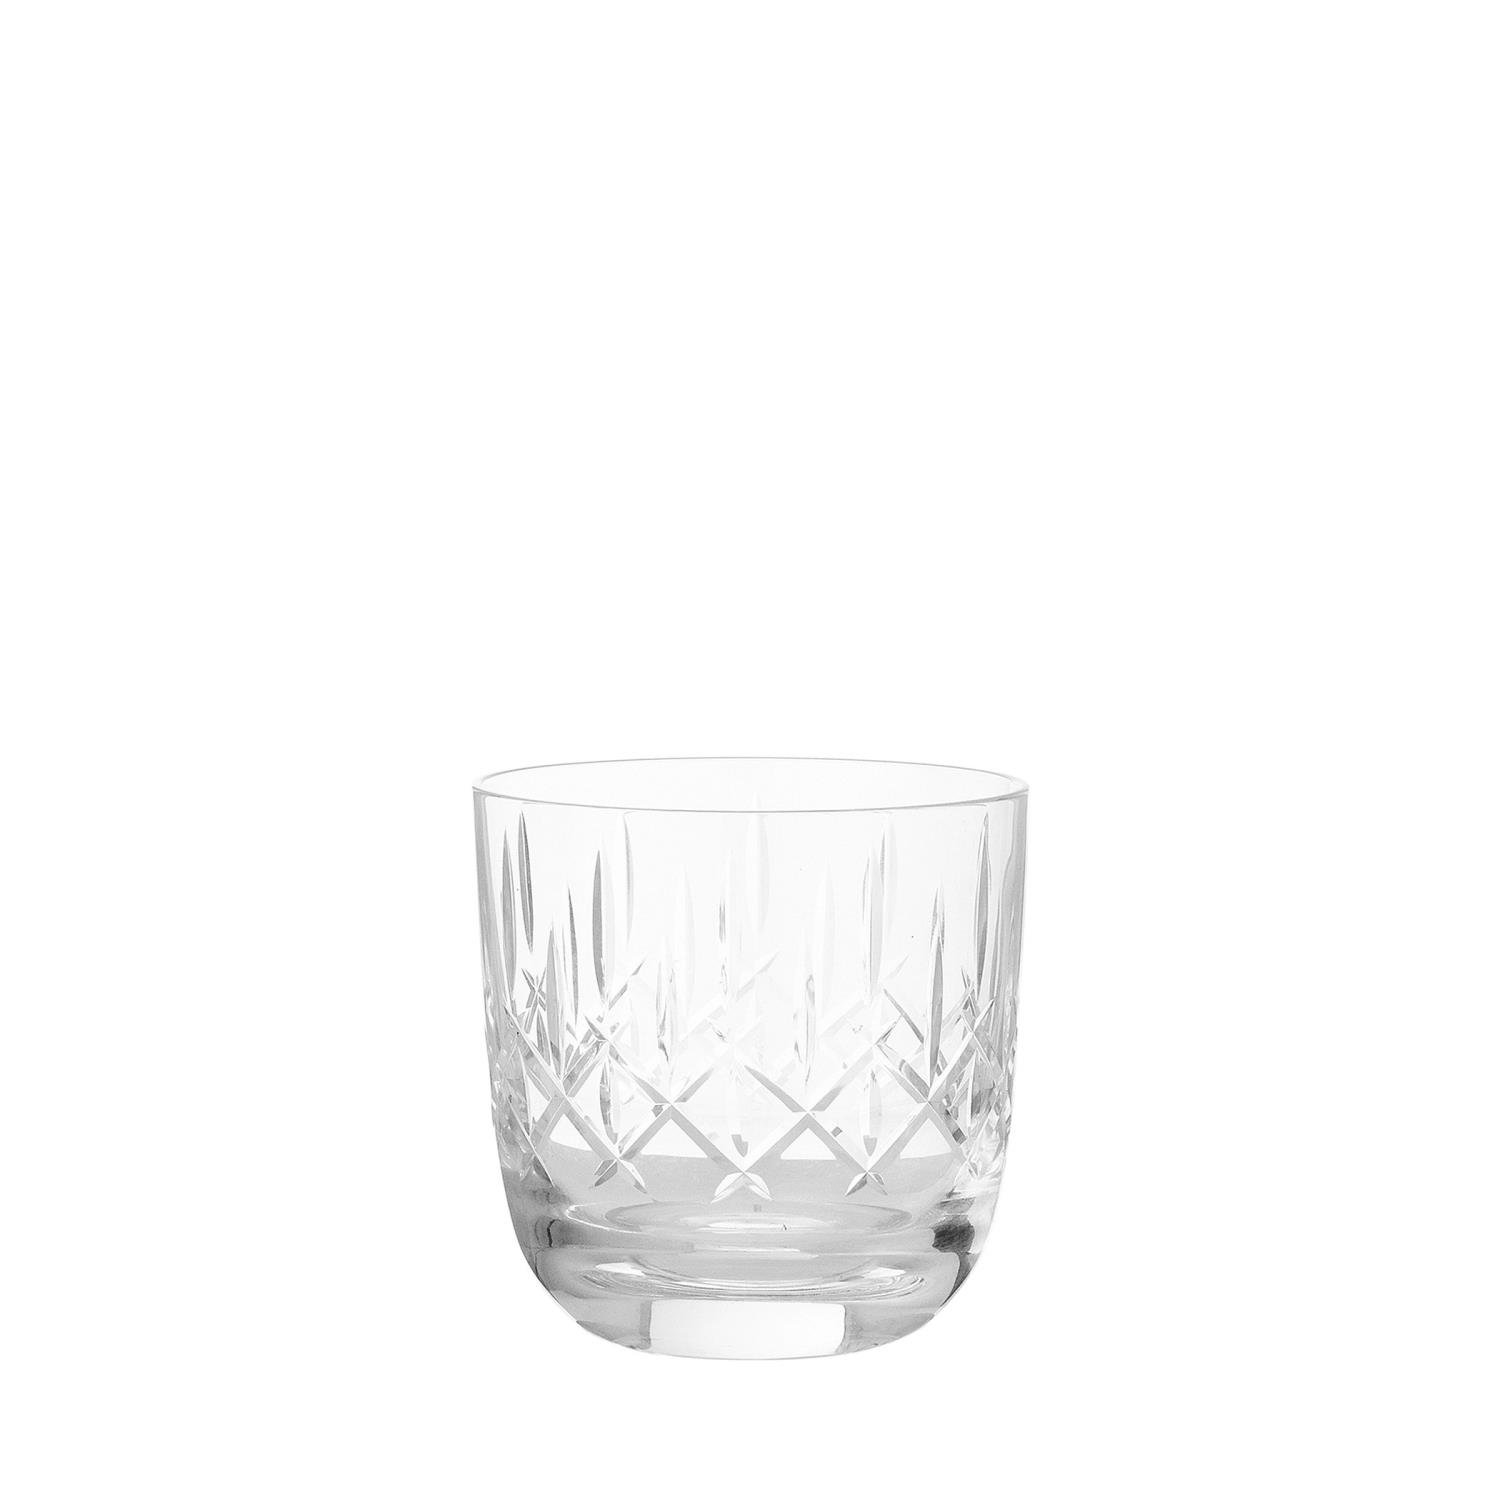 Louise Roe, Whisky Glass